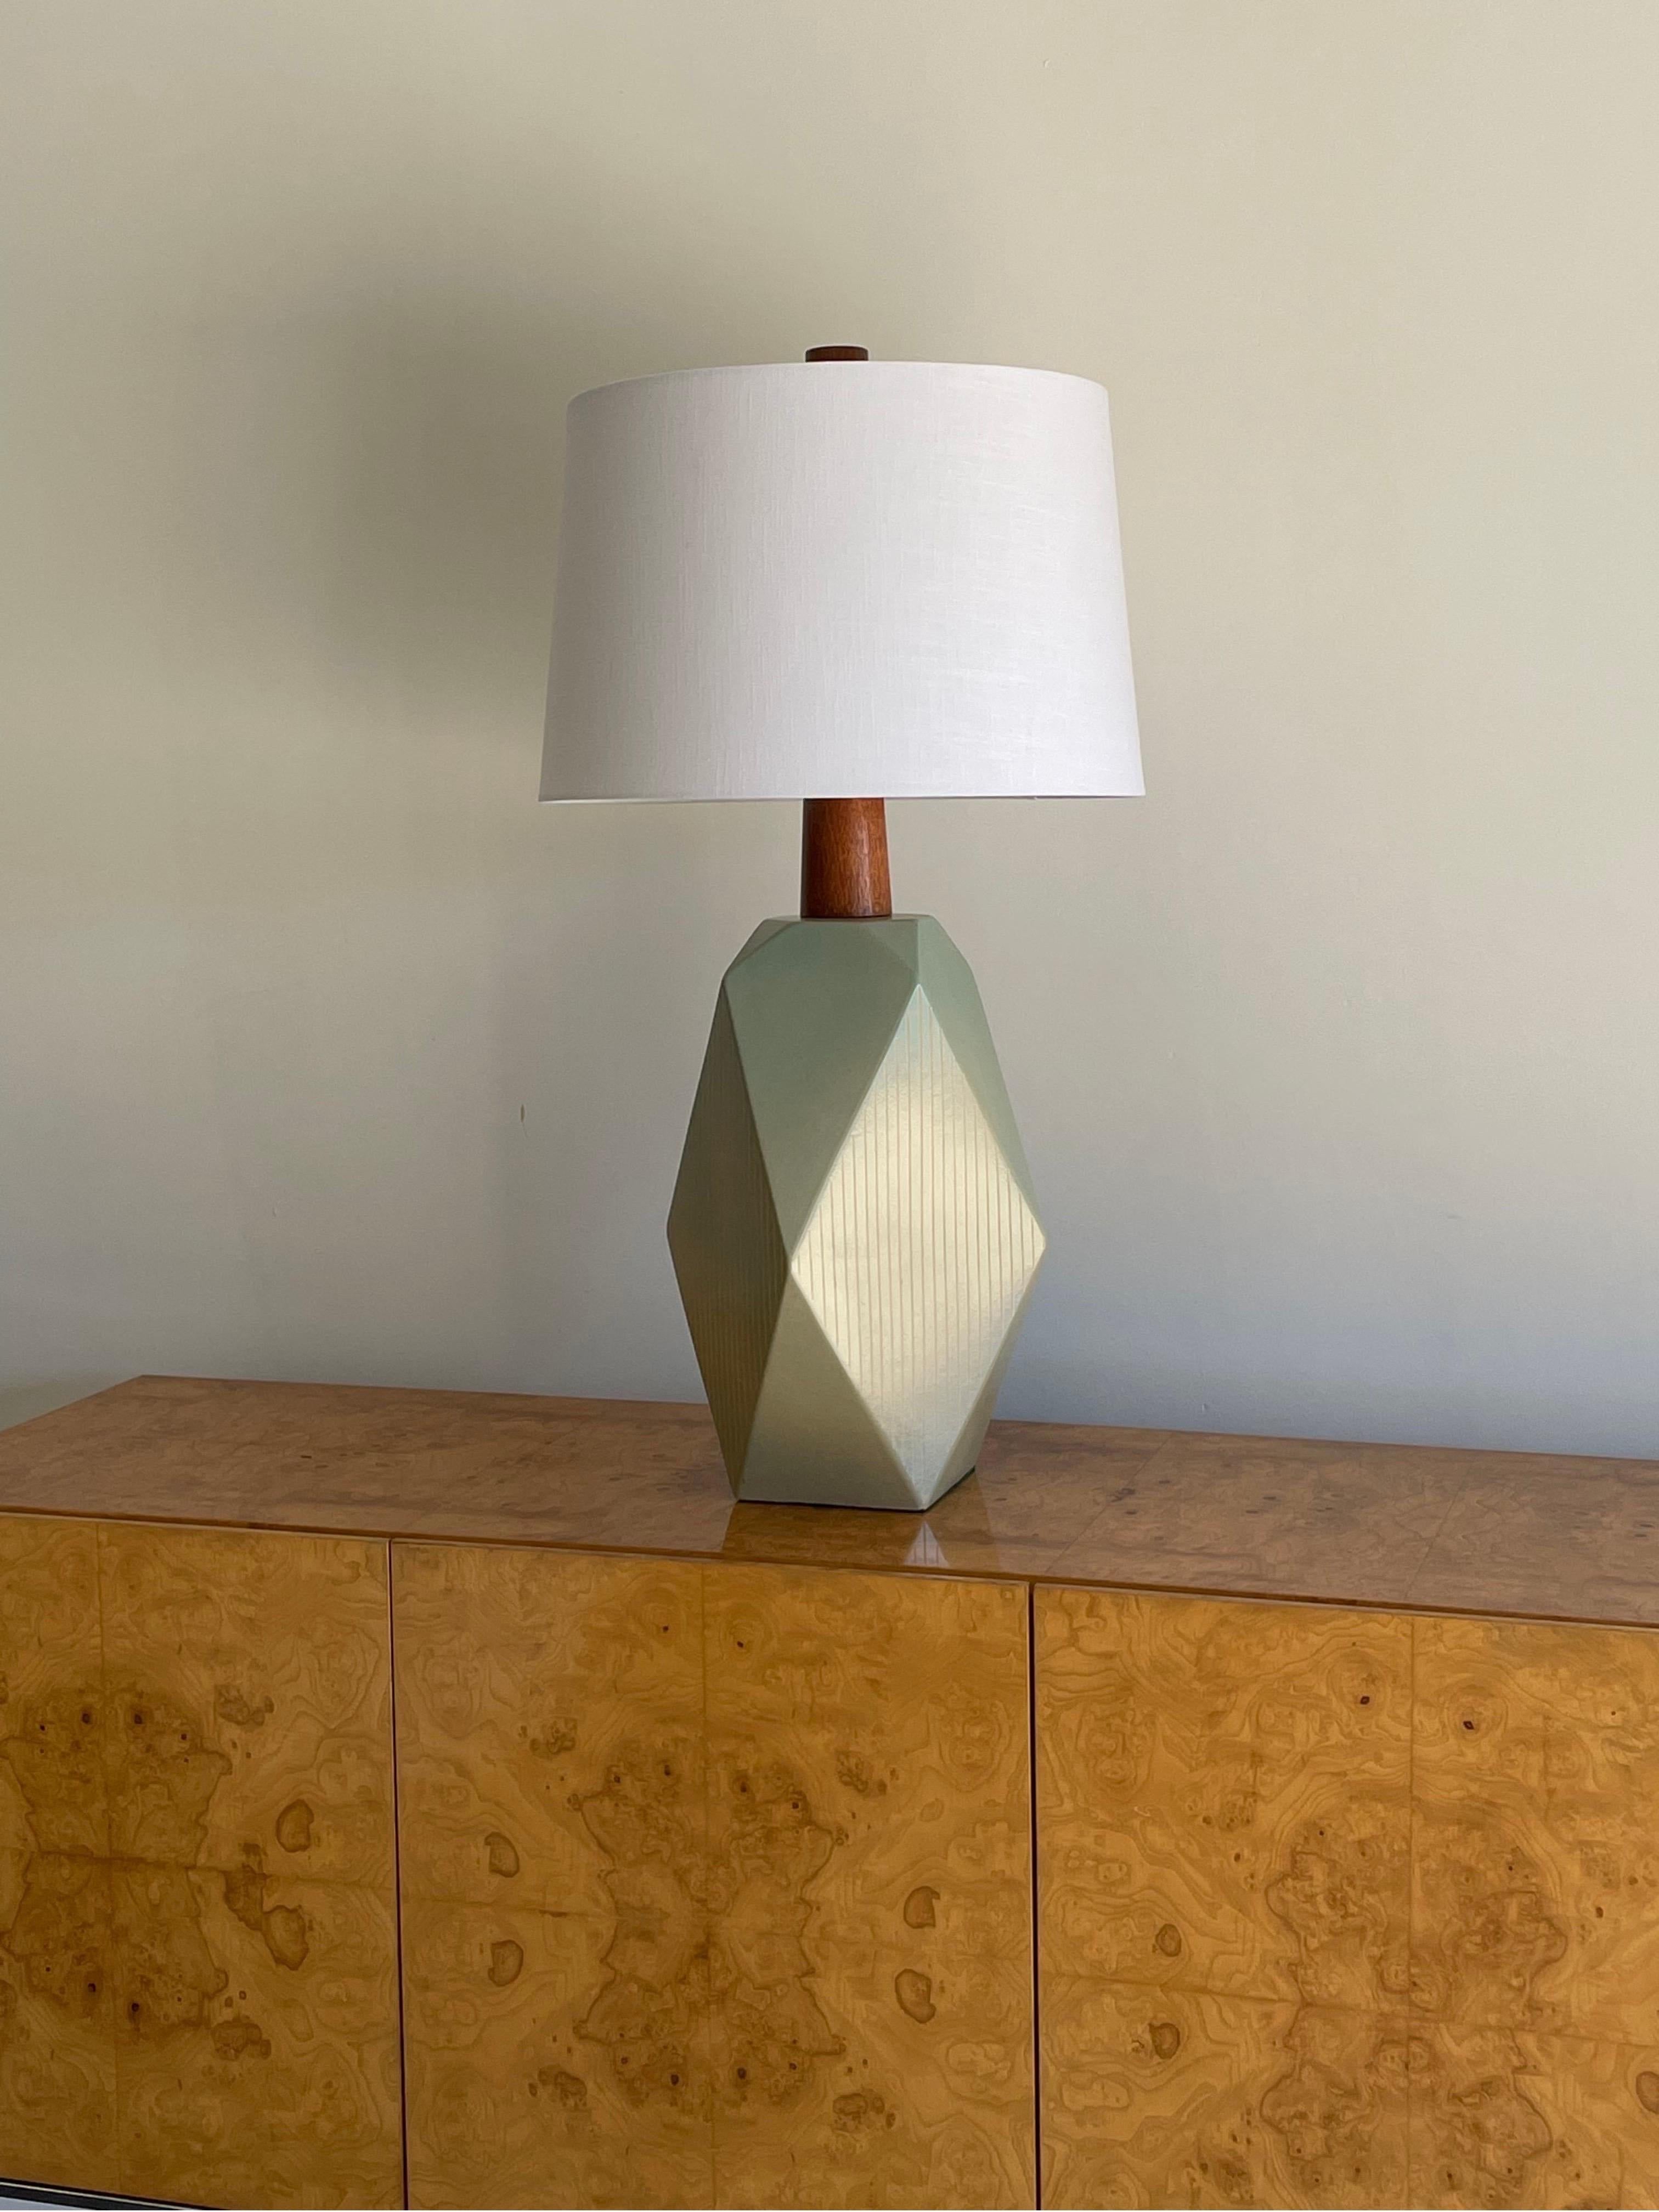 Wonderful and impressive table lamp designed by famed ceramicist duo Jane and Gordon Martz. Color is a sea foam blue/green which is more prevalent towards the top and cascades into a cream at the bottom. 

This particular lamp is signed Genesis